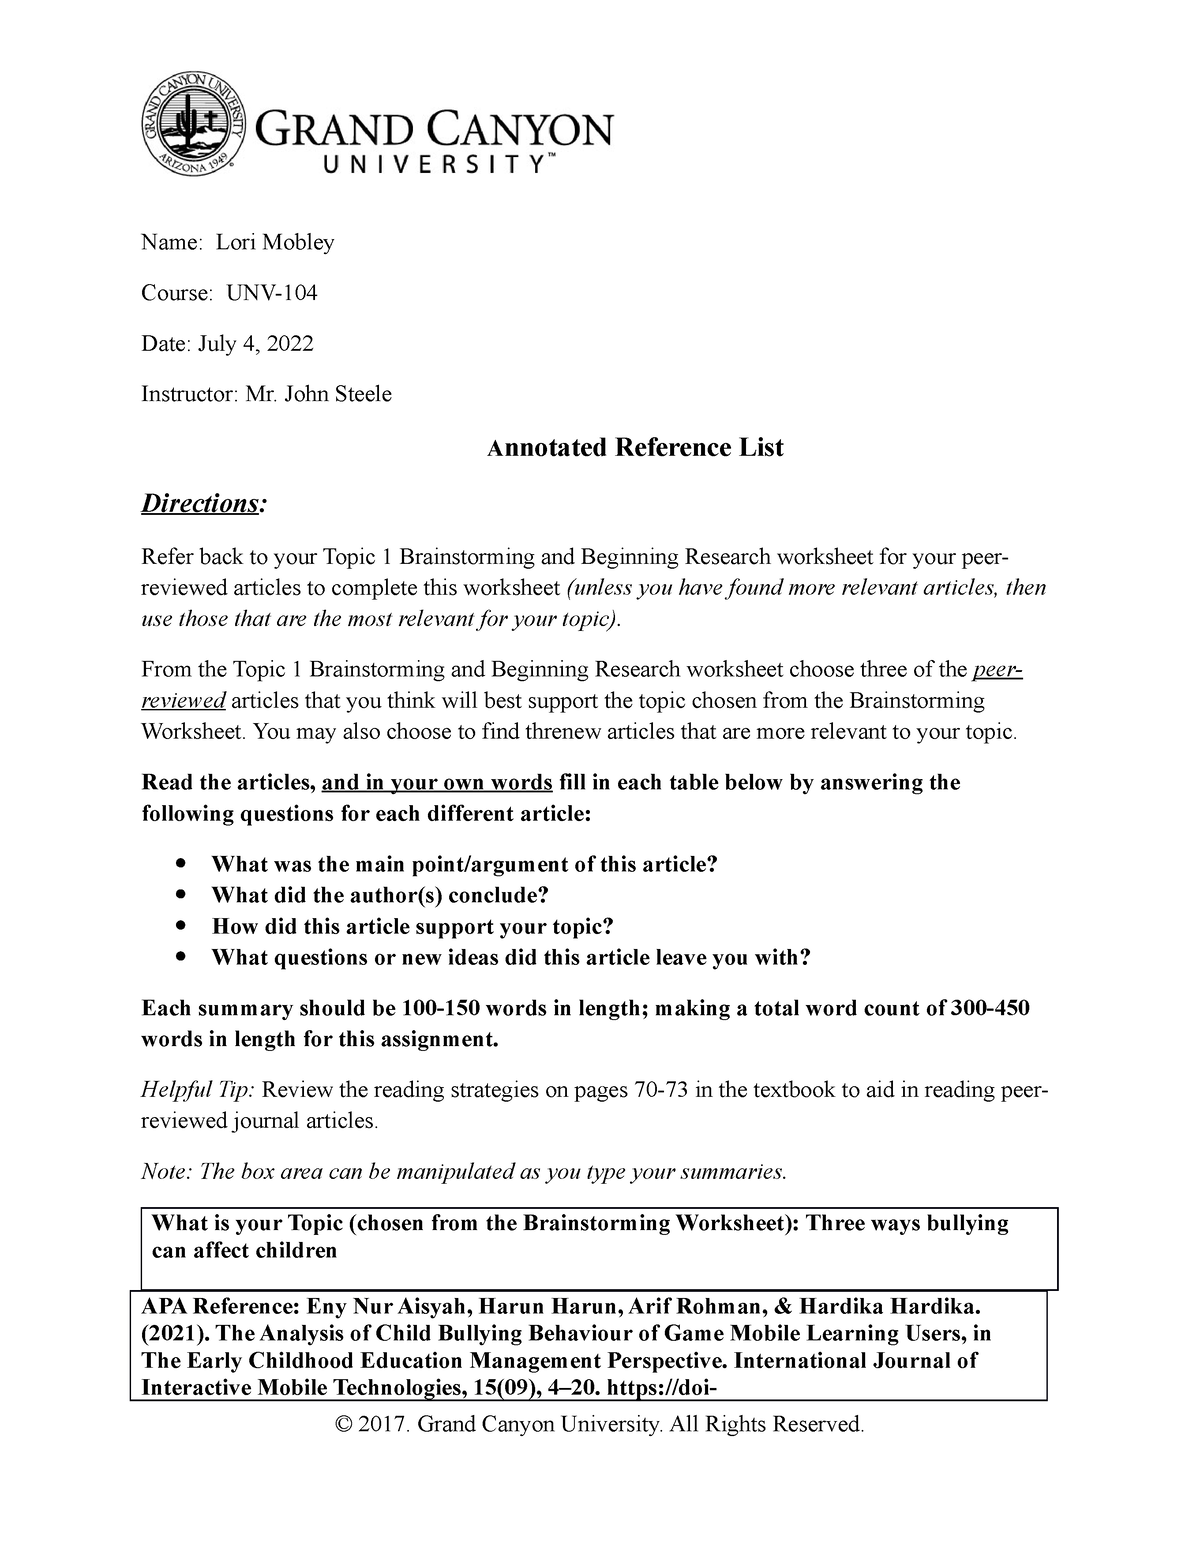 reading strategies and annotated reference list assignment